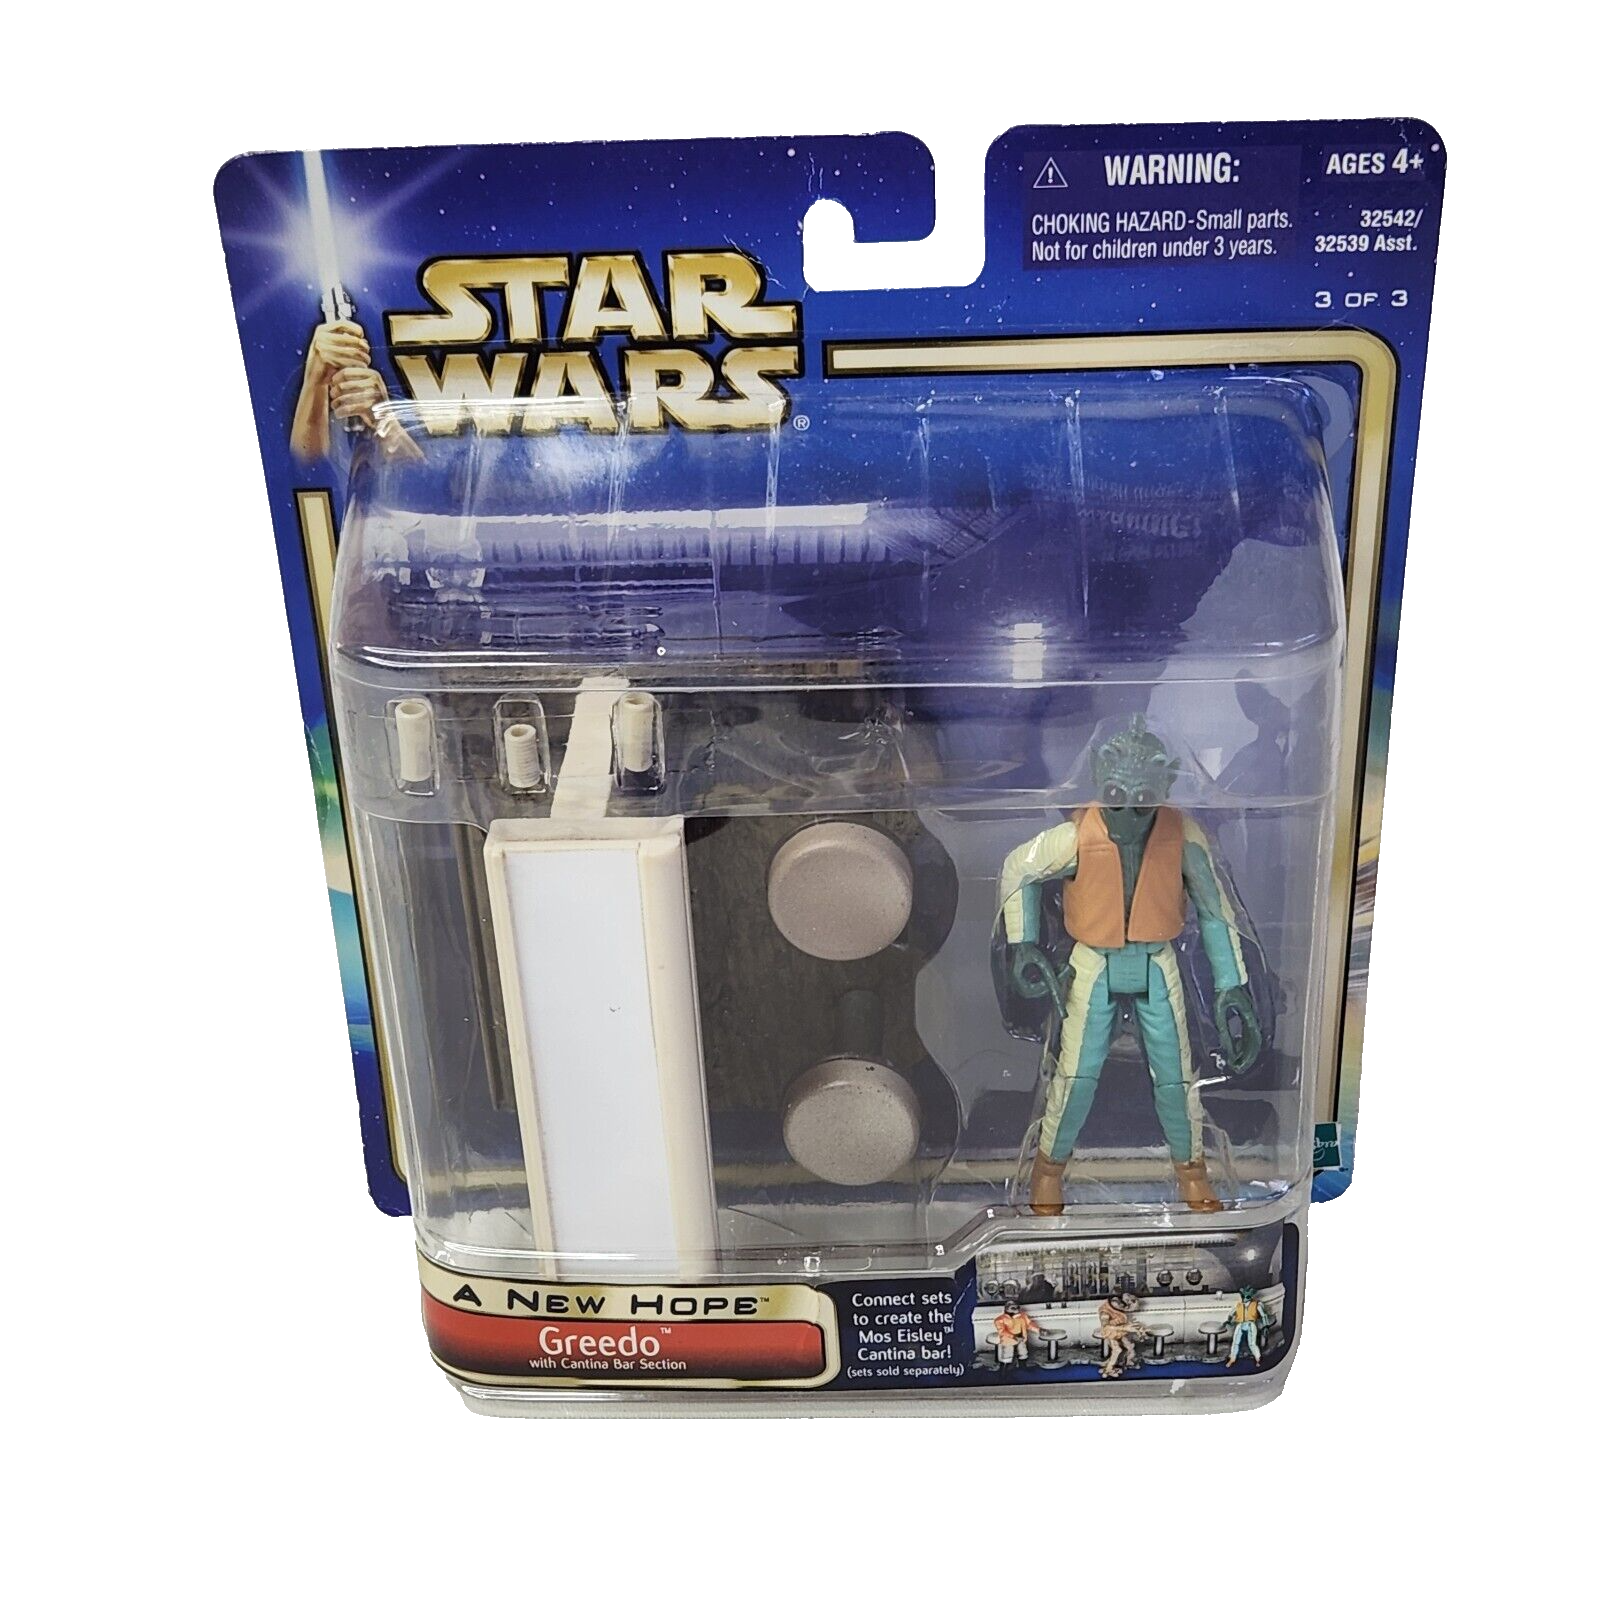 2002 HASBRO STAR WARS A NEW HOPE GREEDO W/ BAR SECTION ACTION FIGURE # 32542 - $16.63